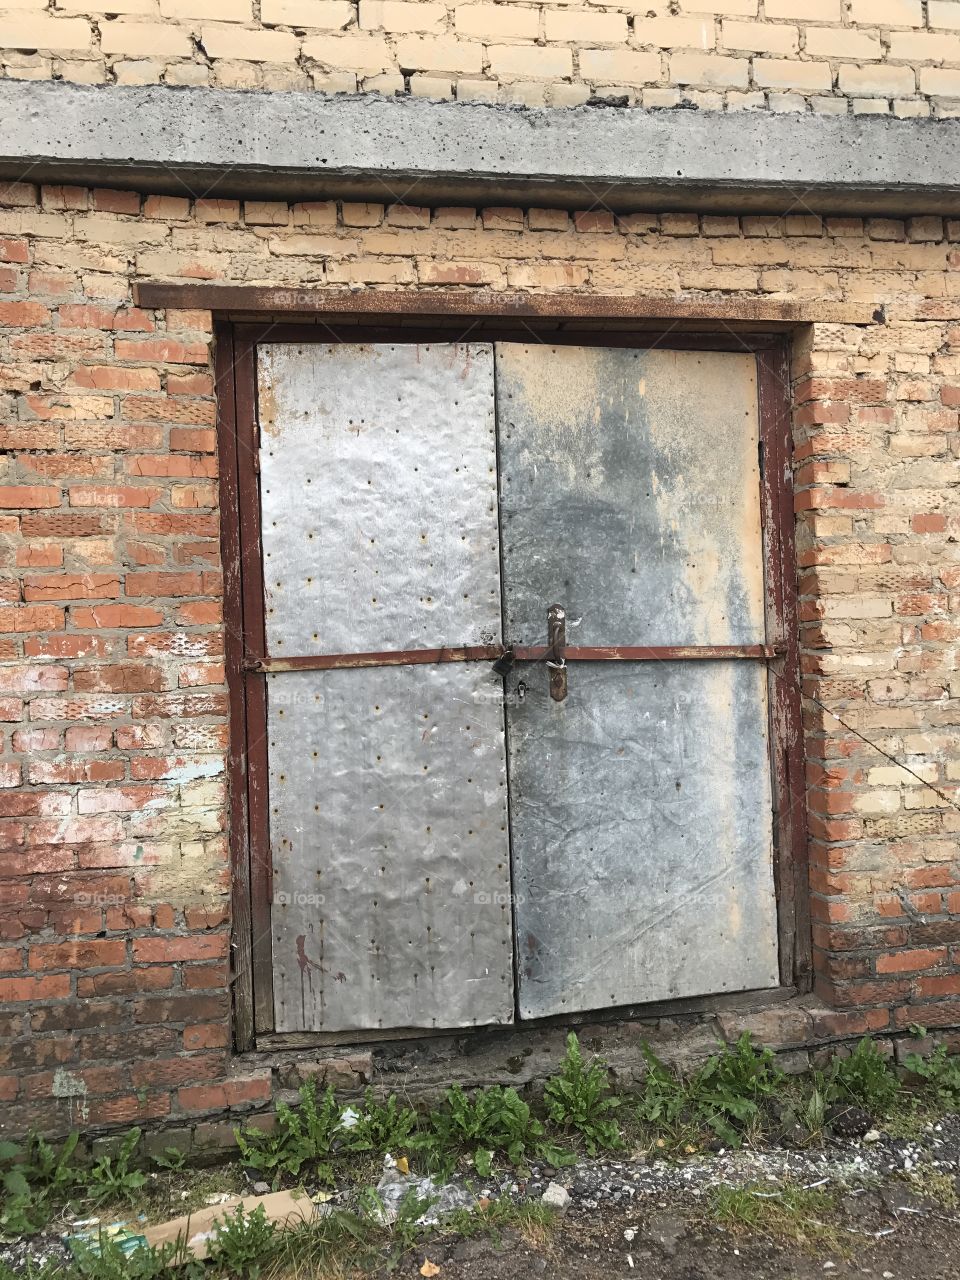 House, Wall, Architecture, Old, Window